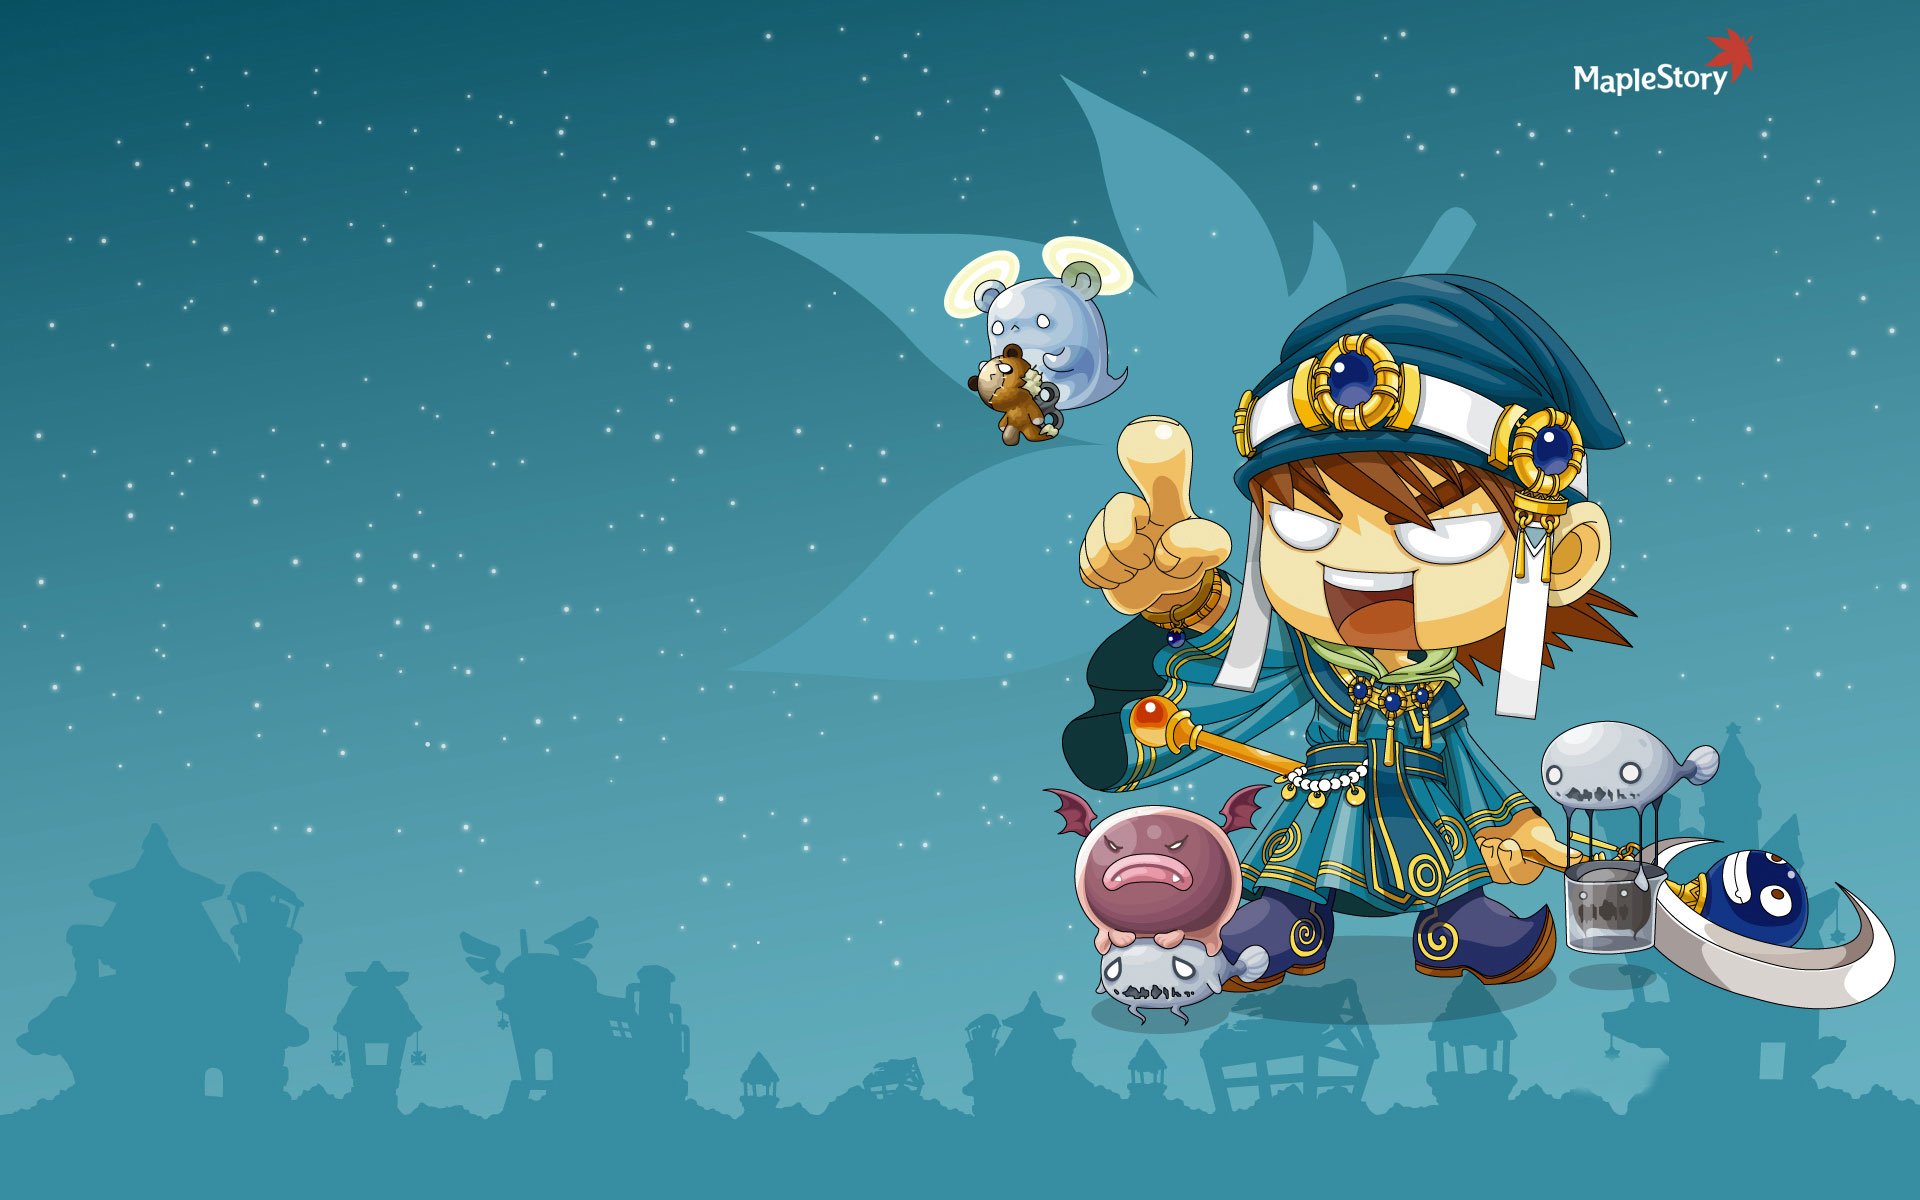 Official MapleStory Backgrounds - Official MapleStory Website